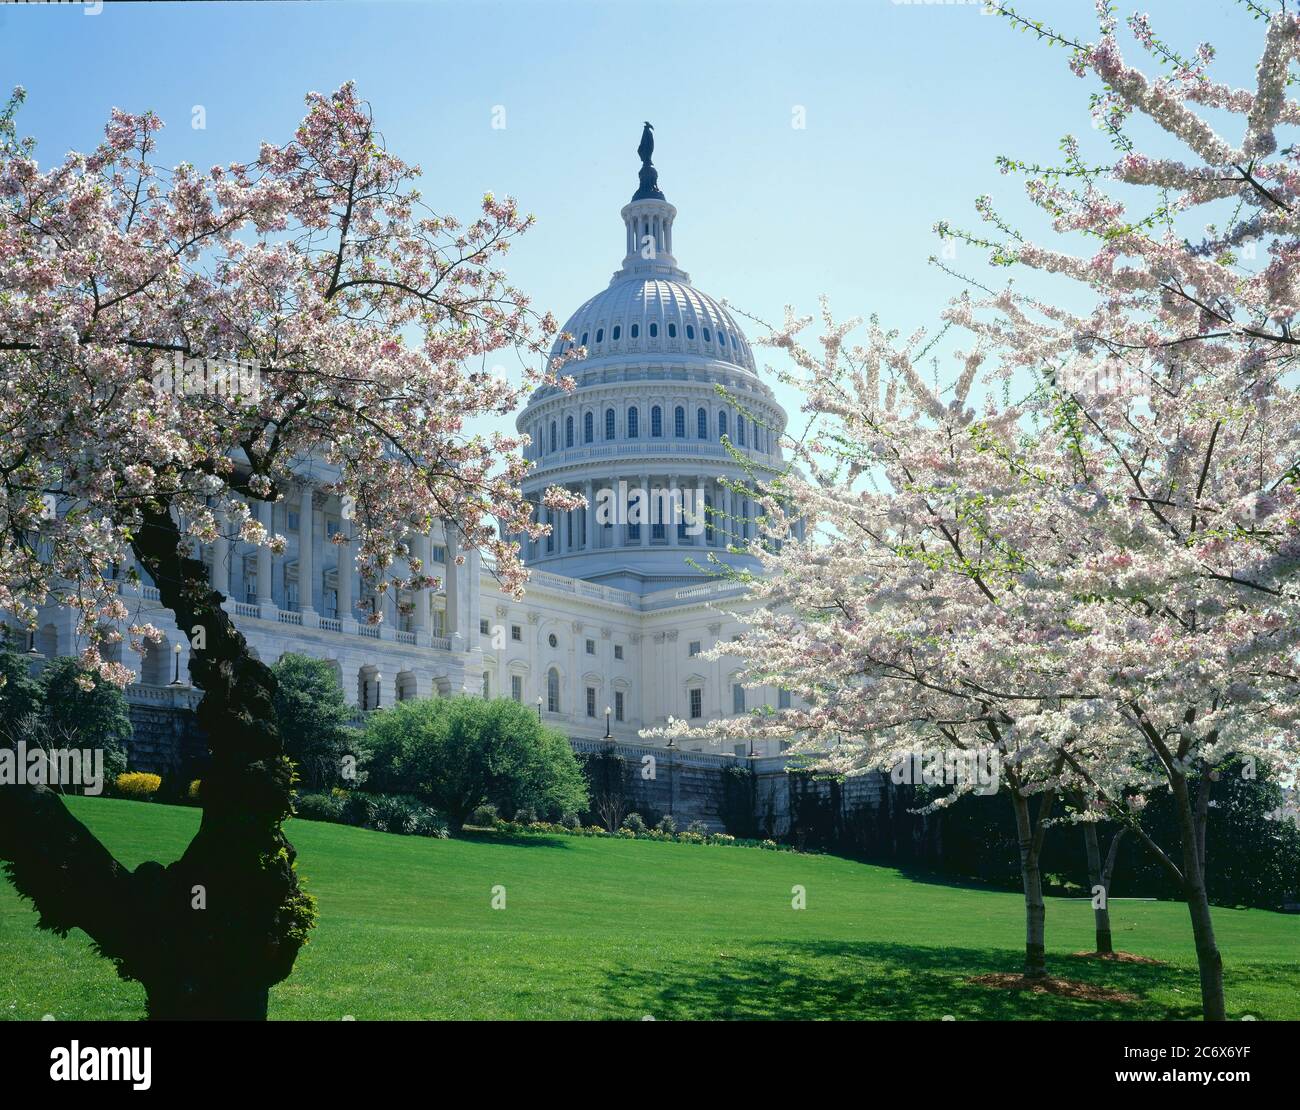 Washington D.C./APR Cherry trees in blossom frame the great white dome of the nation's Capital. Stock Photo